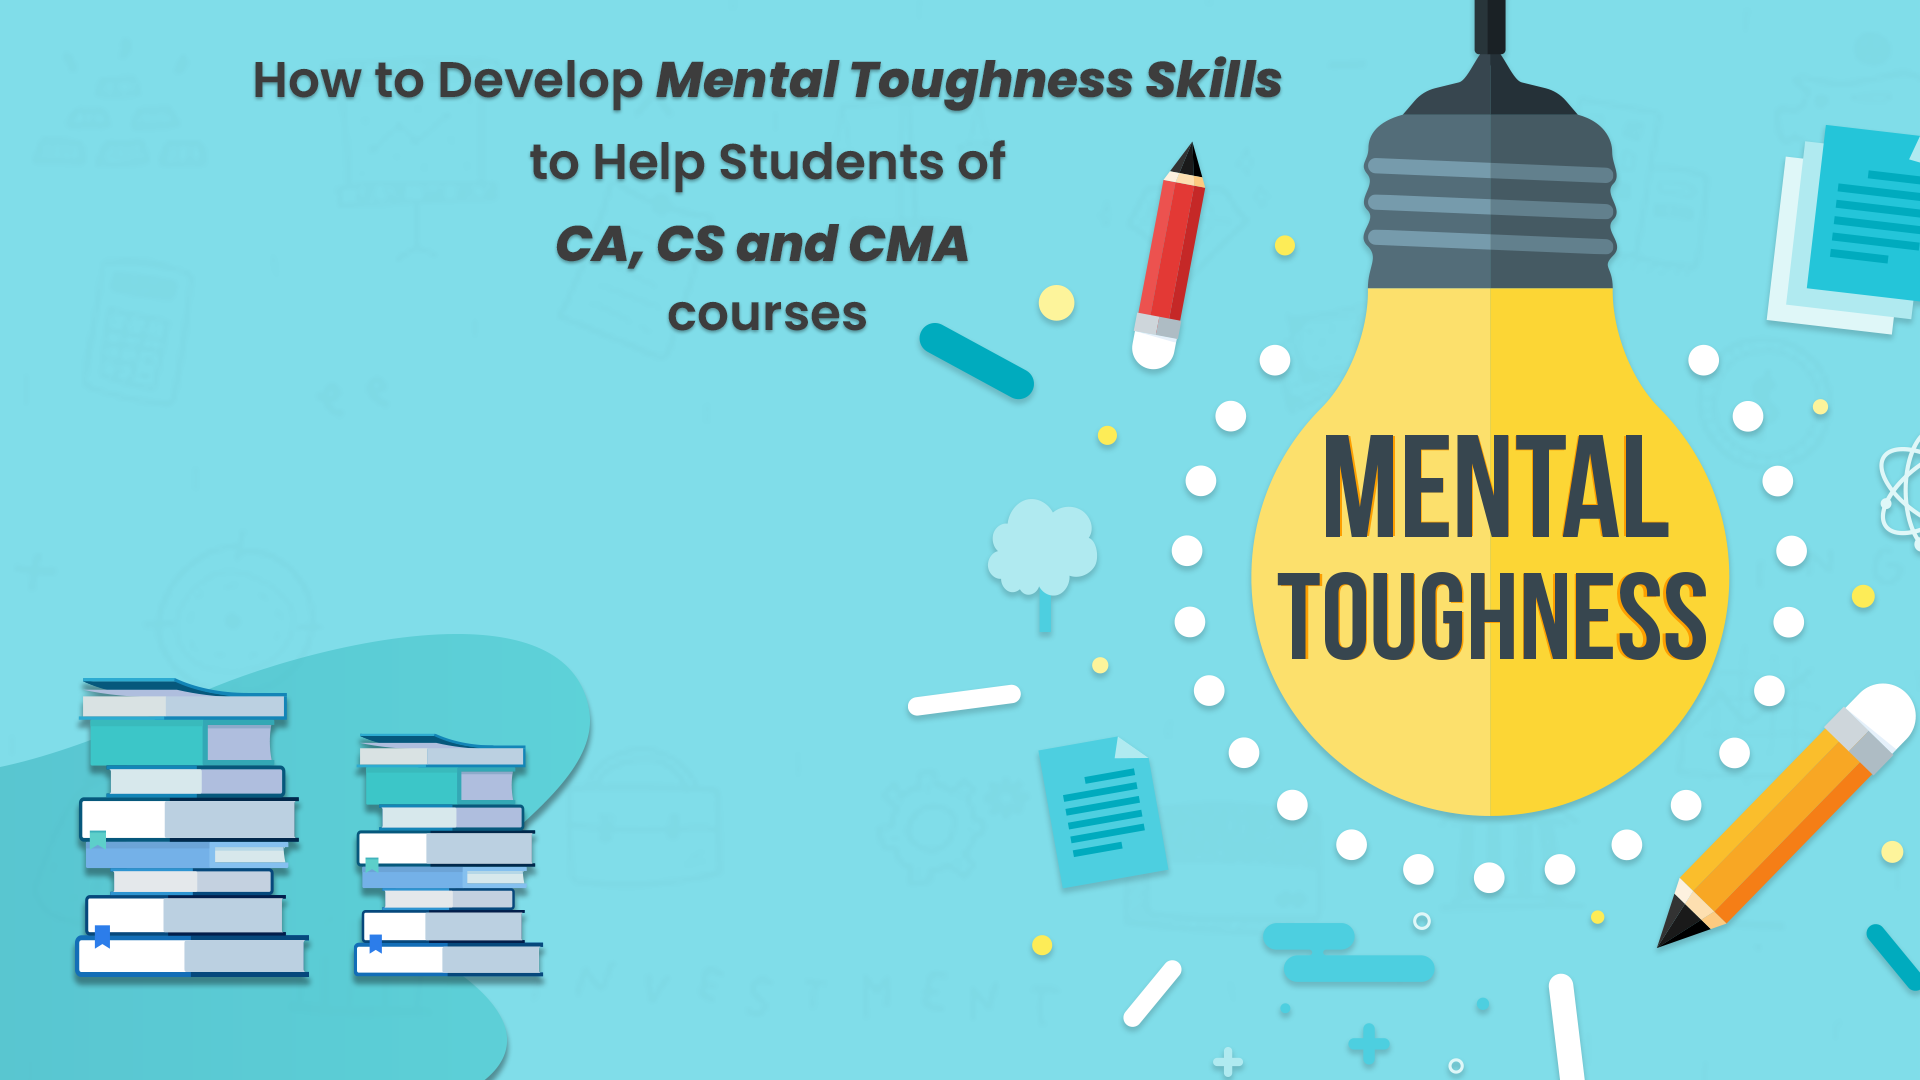 How to Develop Mental Toughness Skills for Students of CA, CS and CMA